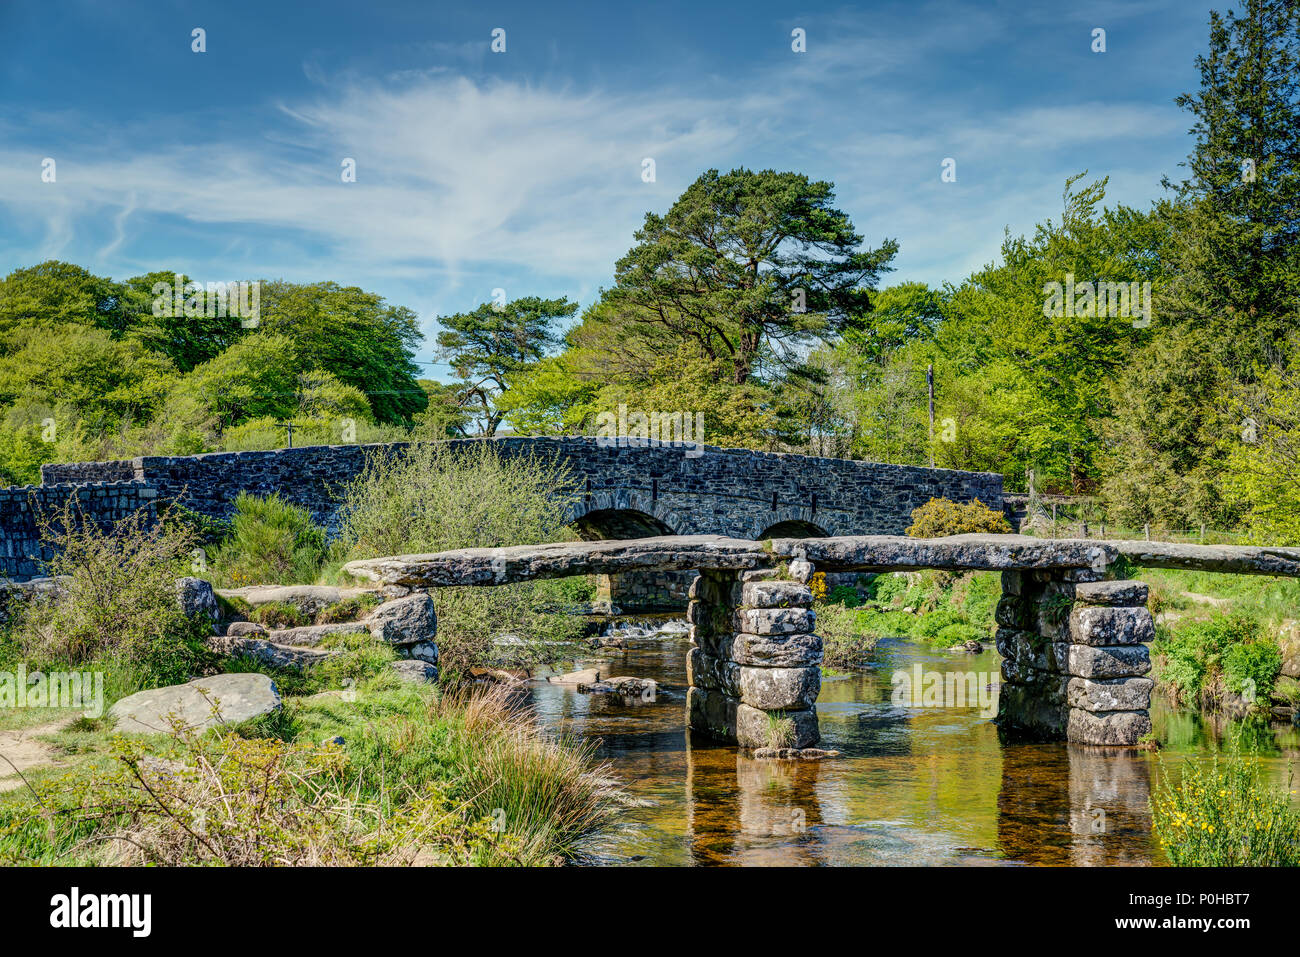 A landscape of the ancient clapper bridge at Postbridge in the Dartmoor National Park, Devon taken in Springtime with blue sky and vibrant greenery. Stock Photo